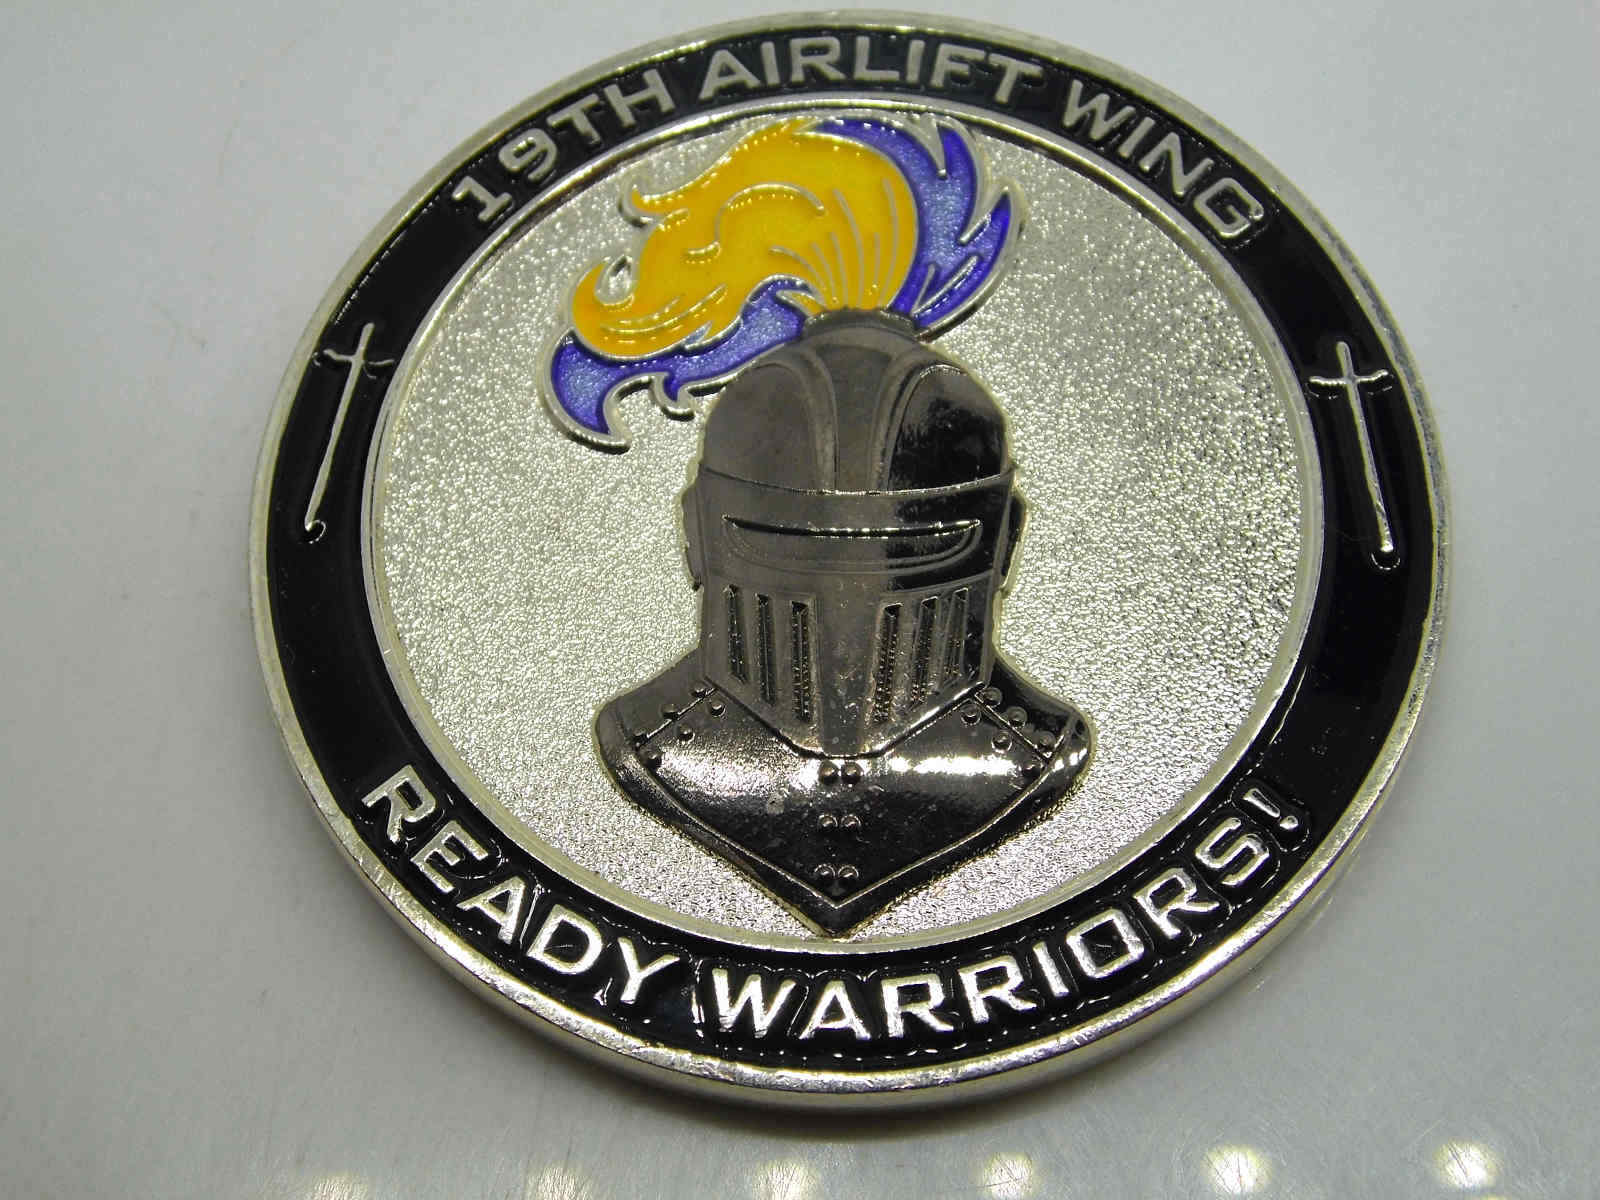 19TH AIRLIFT WING COMMANDER FOR EXCELLENCE CHALLENGE COIN